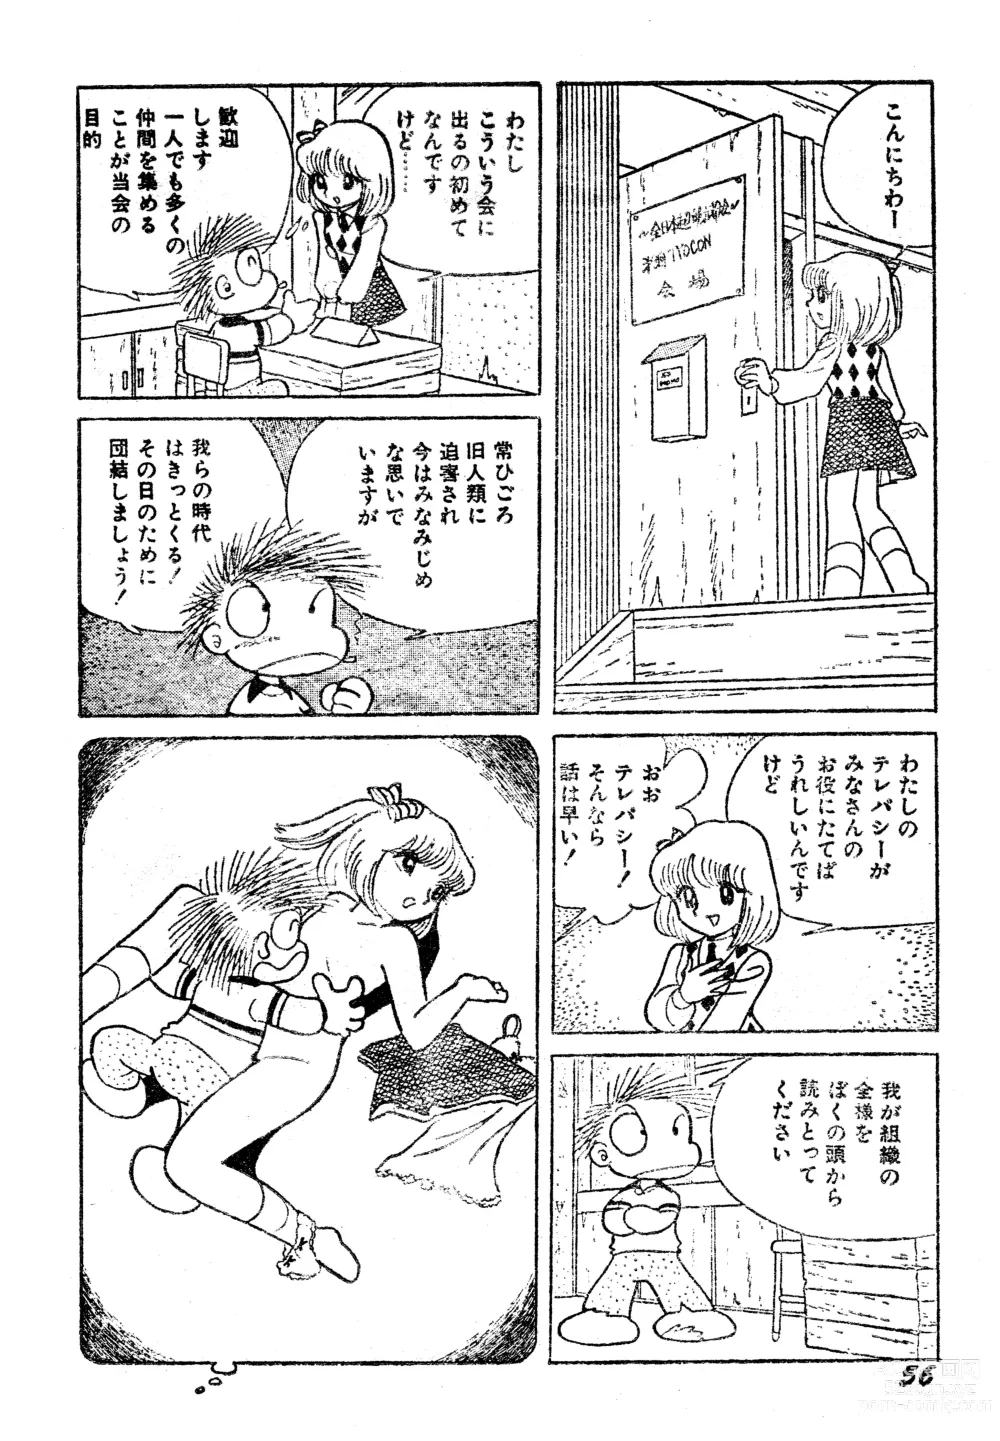 Page 39 of manga Dodemo inner space